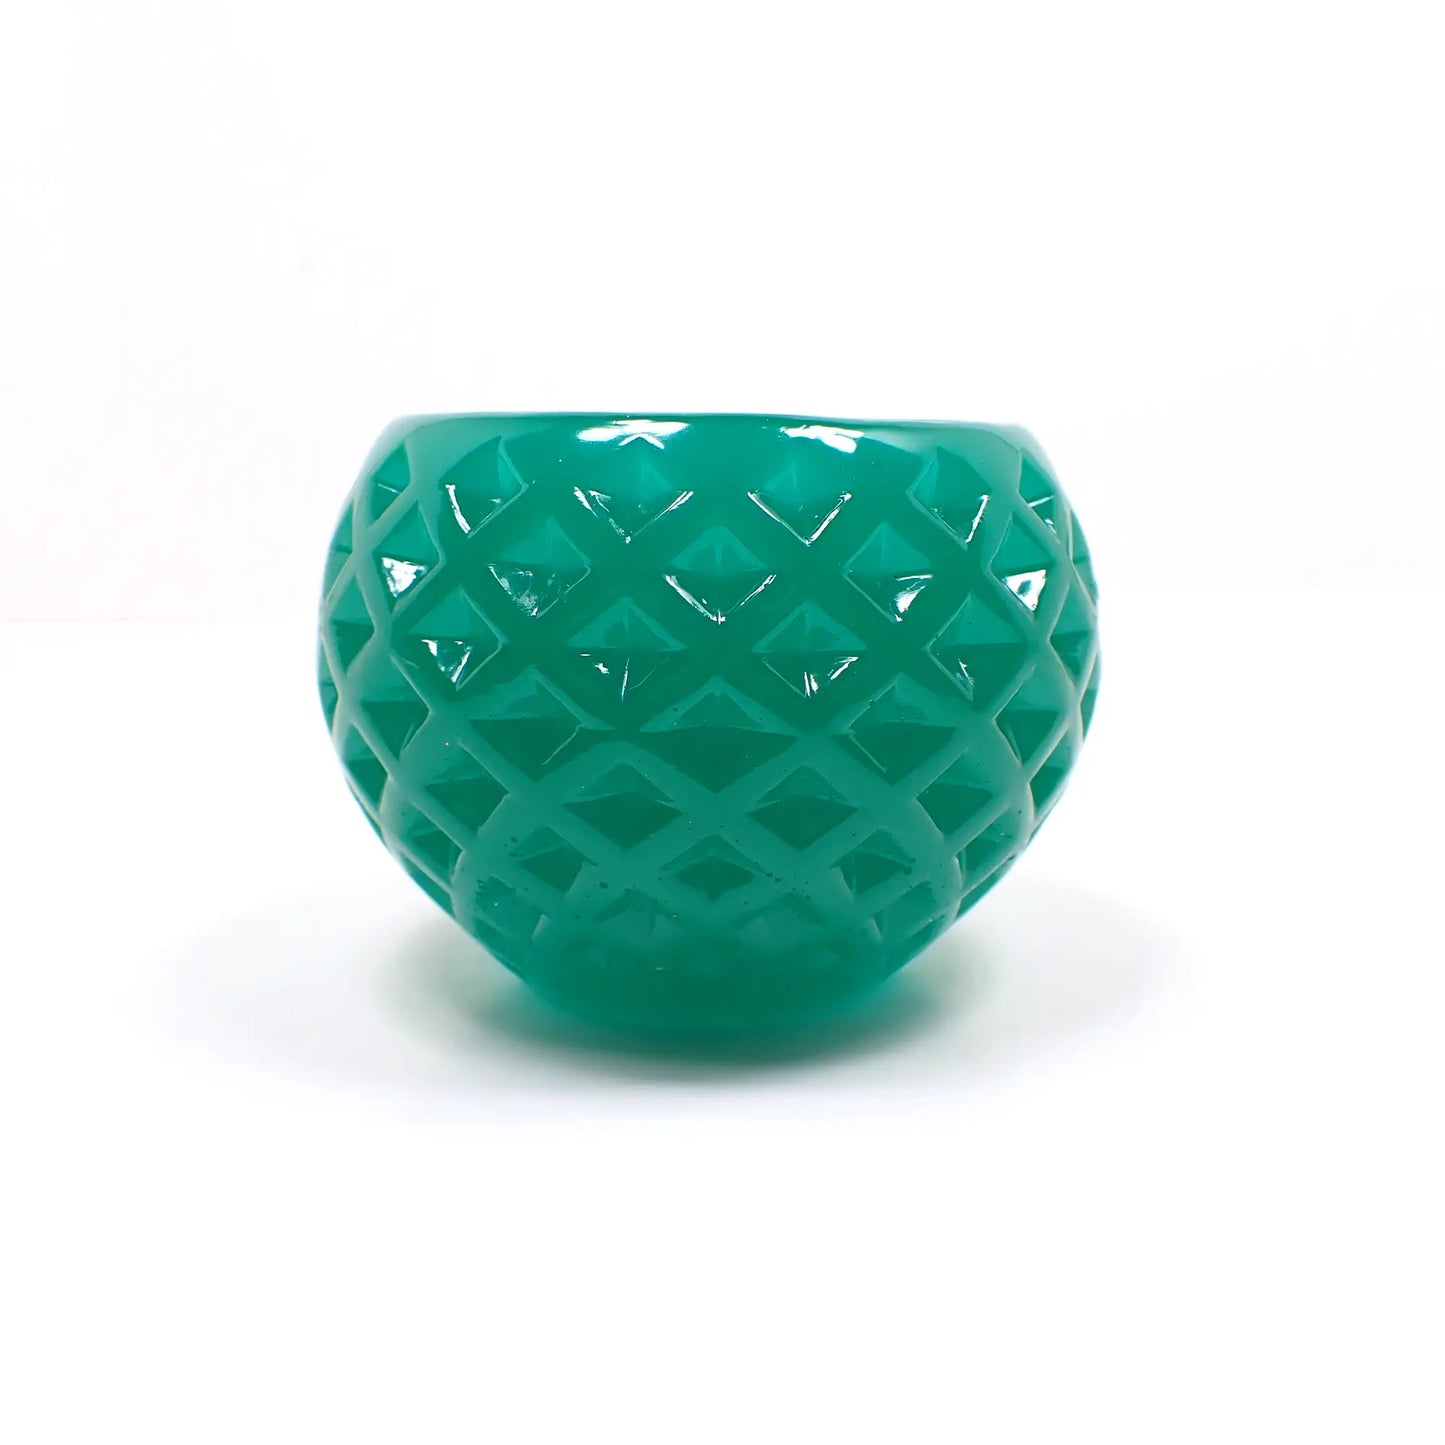 Small Teal and Bright Green Resin Handmade Succulent Pot, Round Decorative Bowl with Indented Diamond Shape Pattern